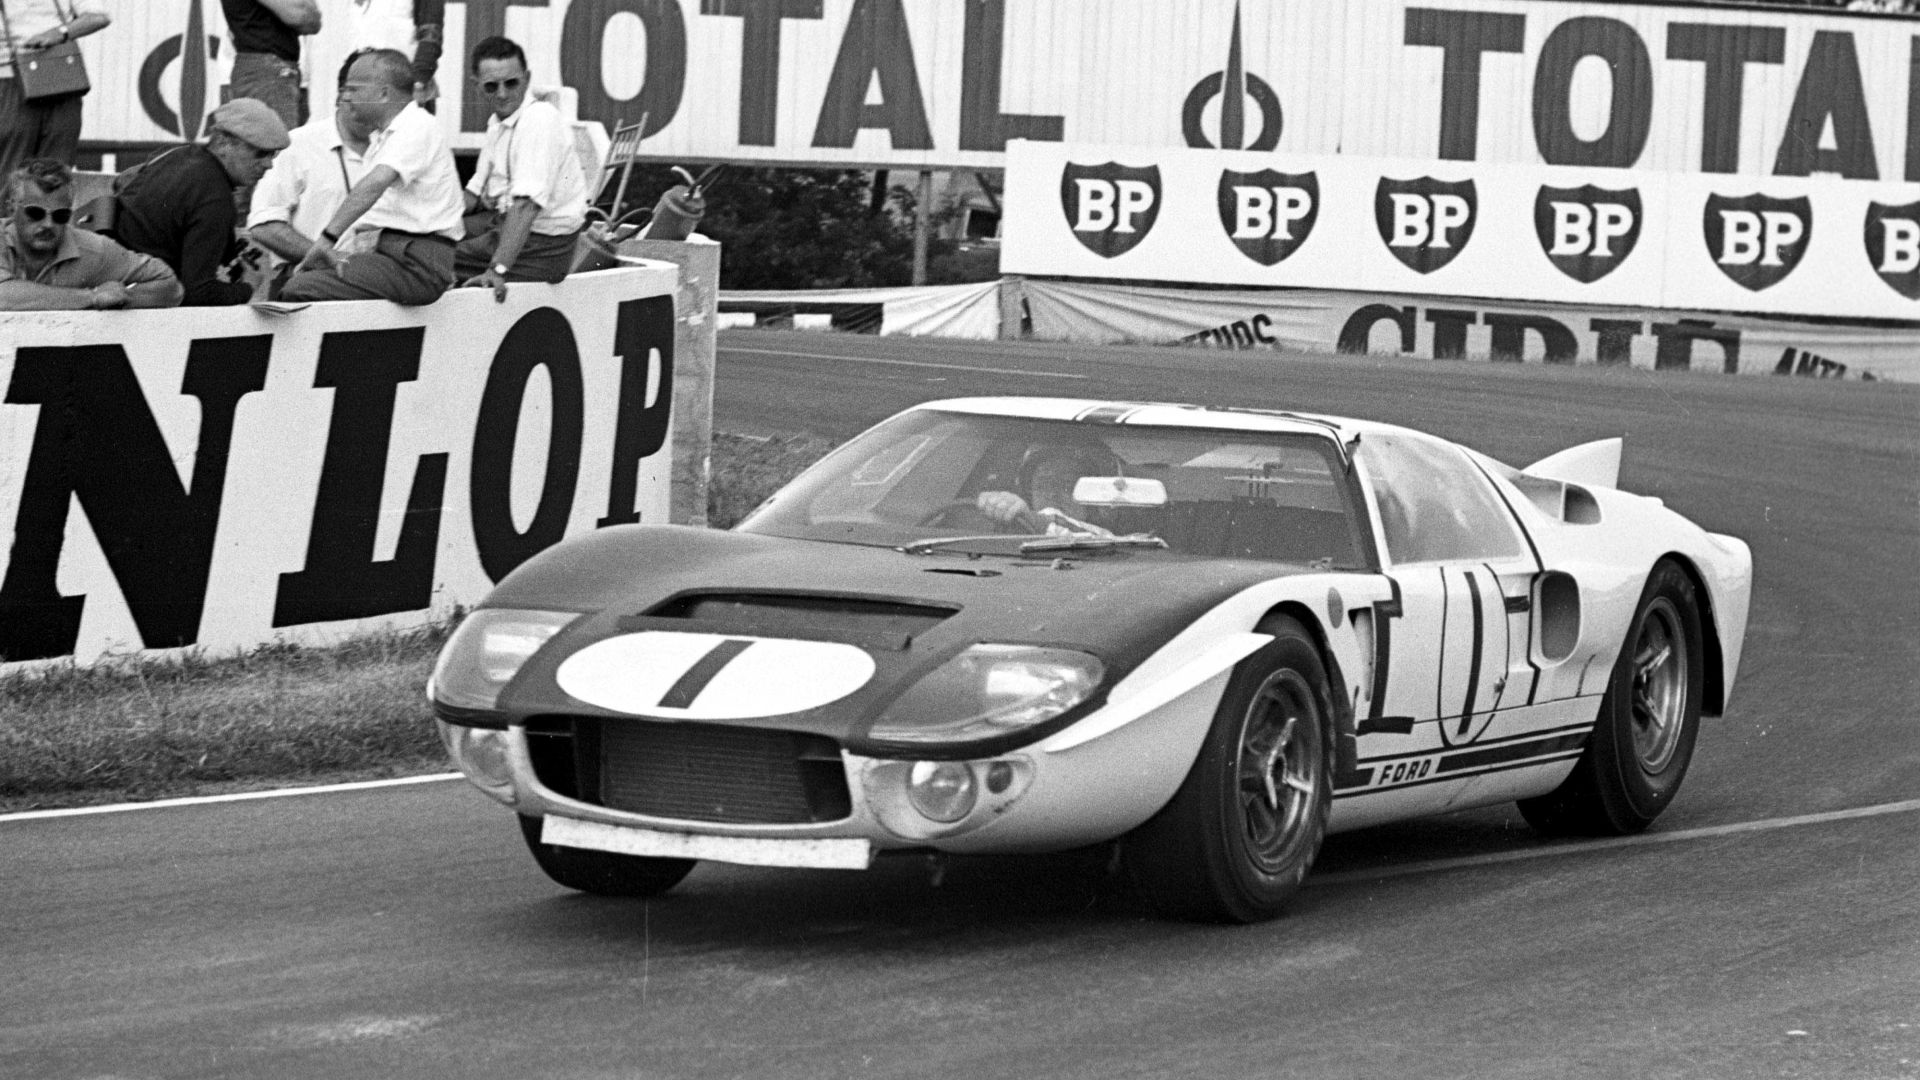 And action shot of the 1965 GT 40 mk2 racing at Le Mans